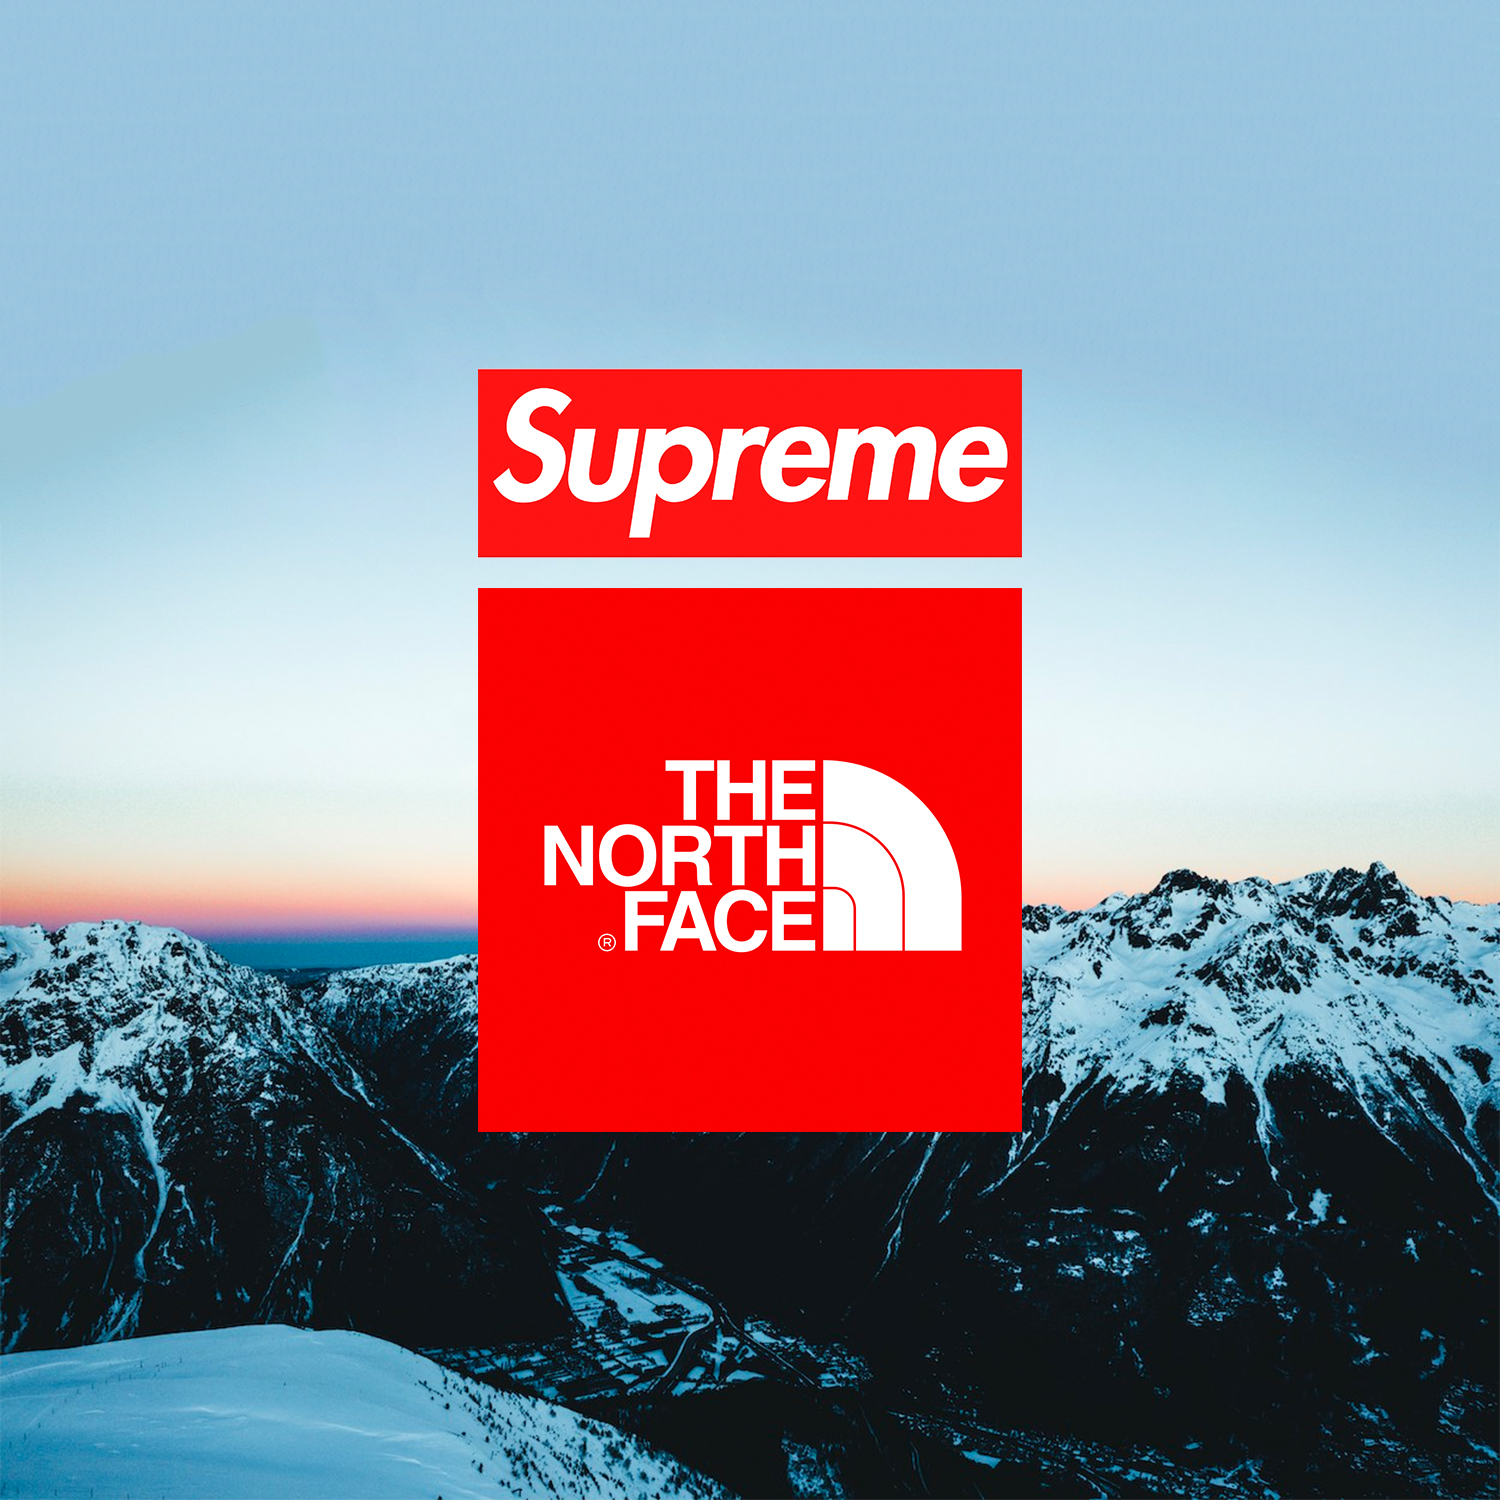 Highlights From the Supreme x The North Face Drop in London